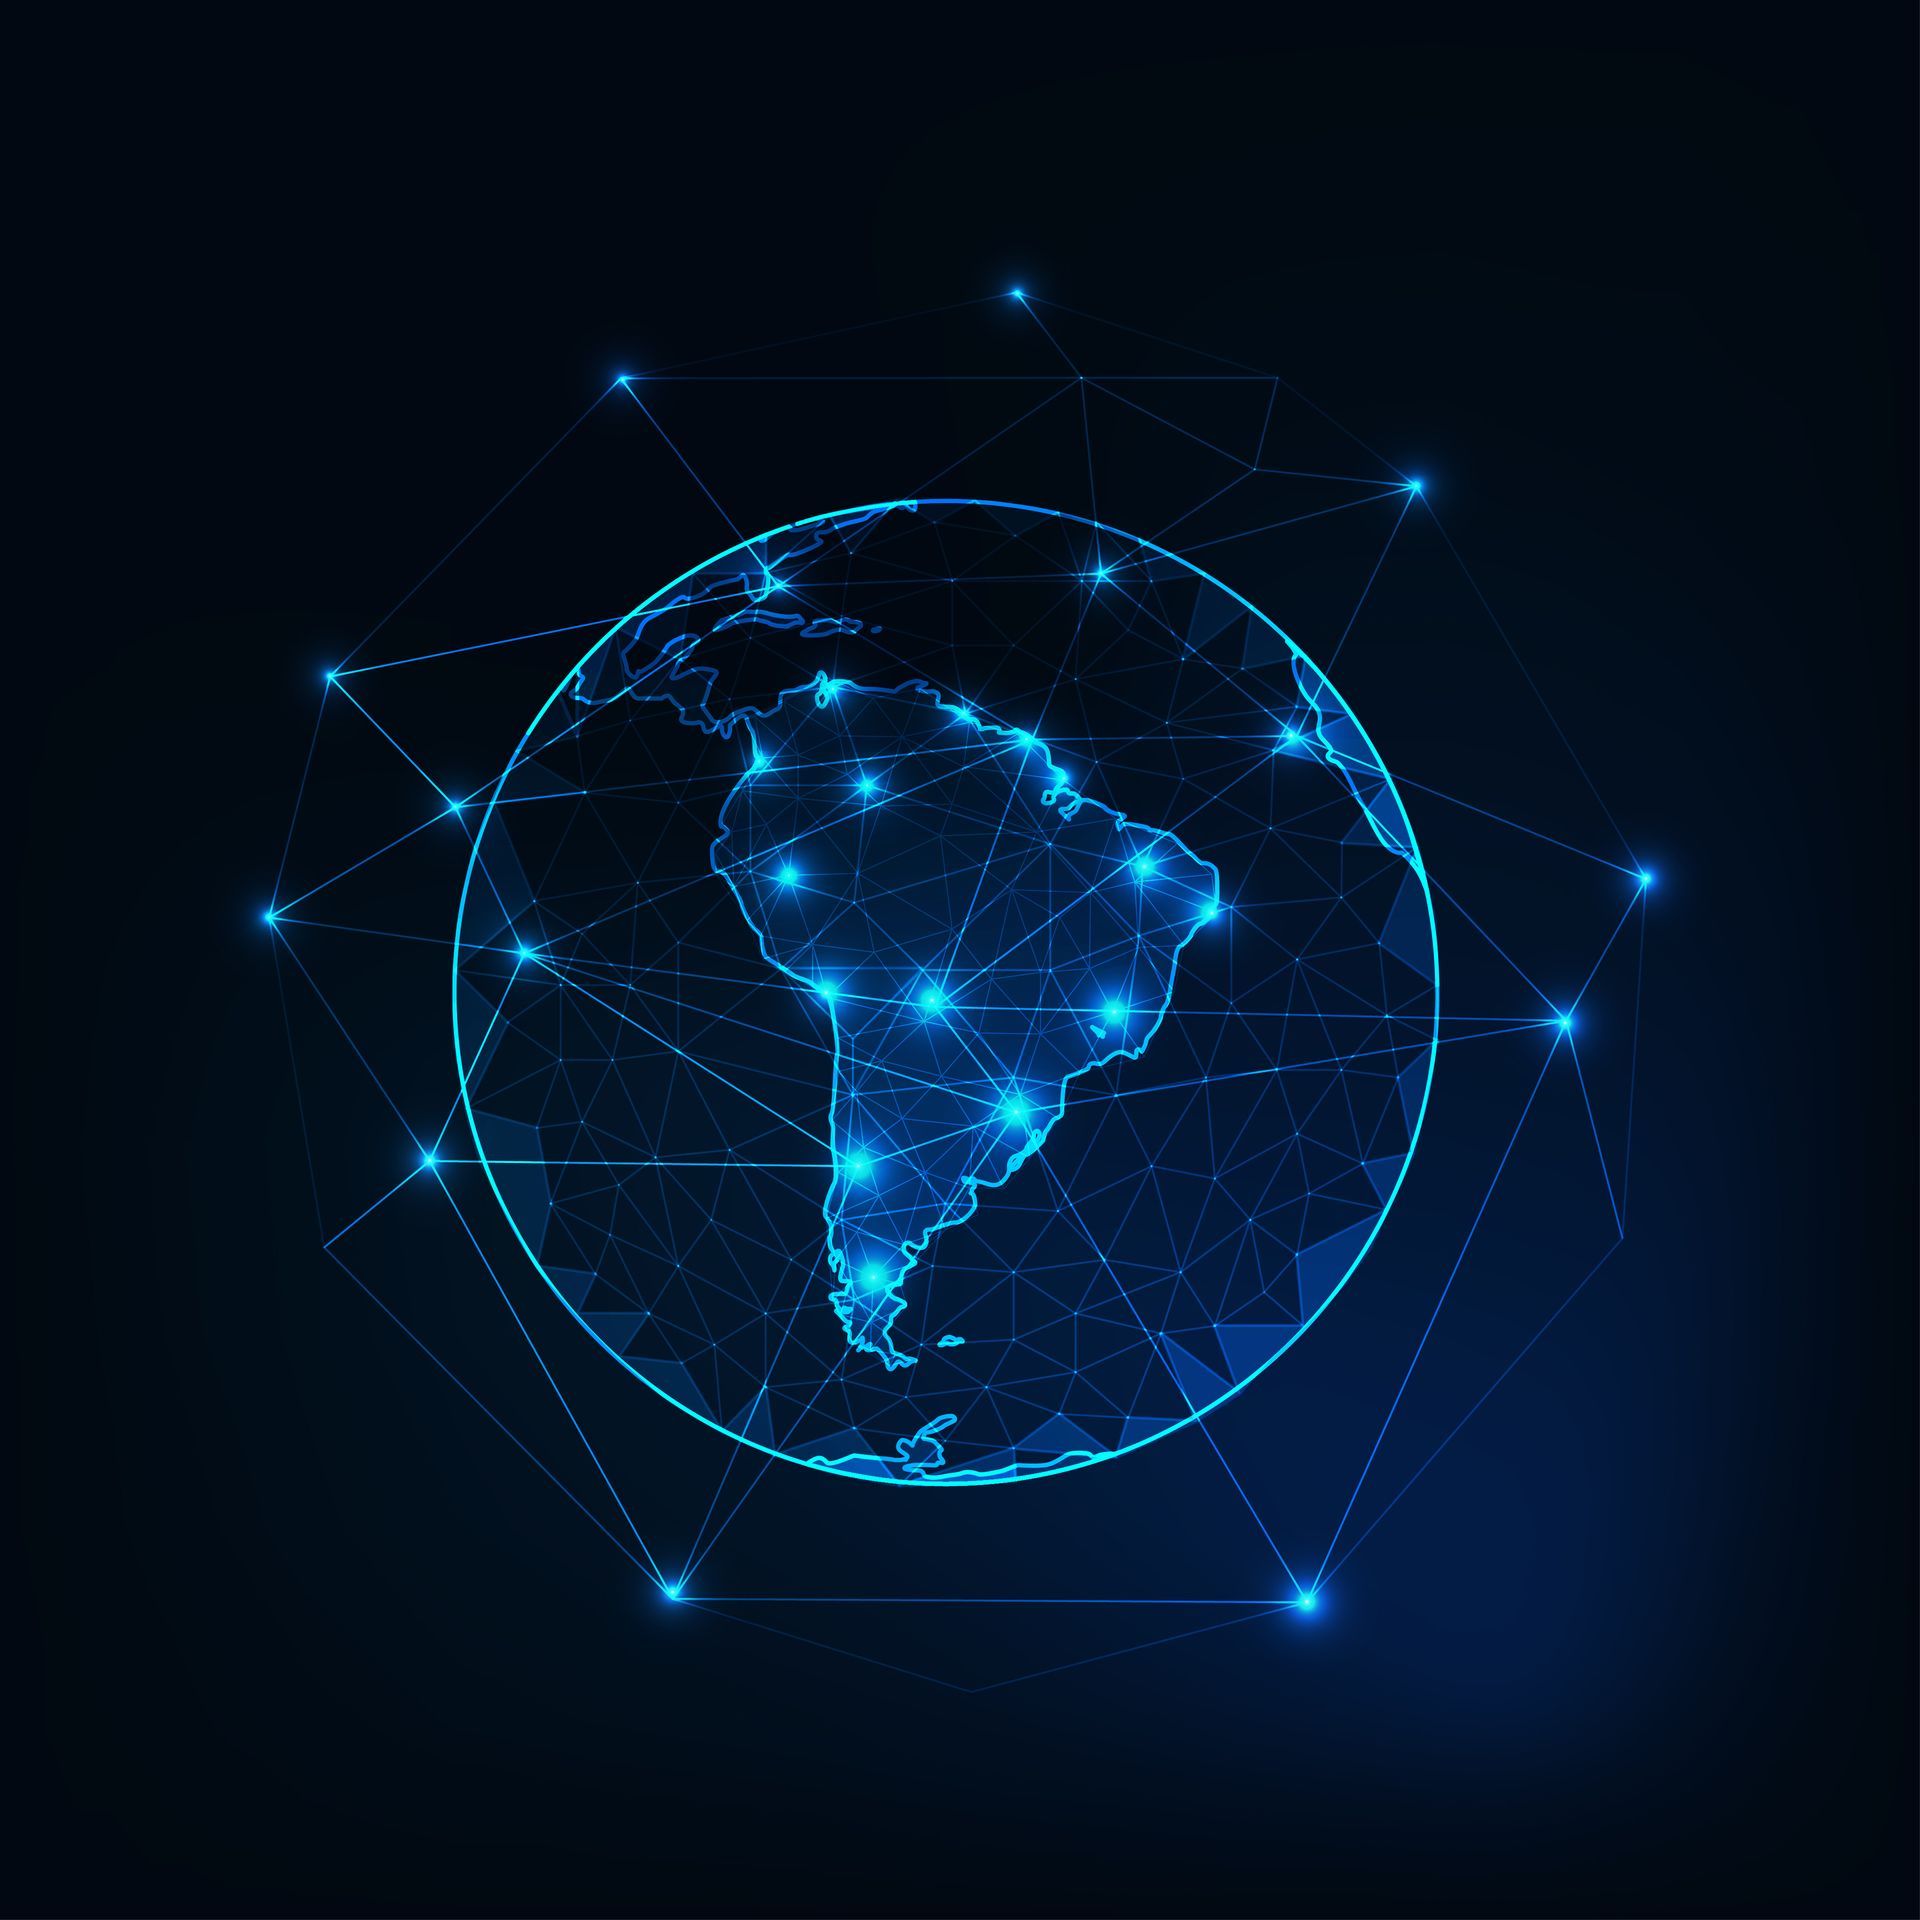 A glowing globe with a map of south america inside of it on a dark blue background.